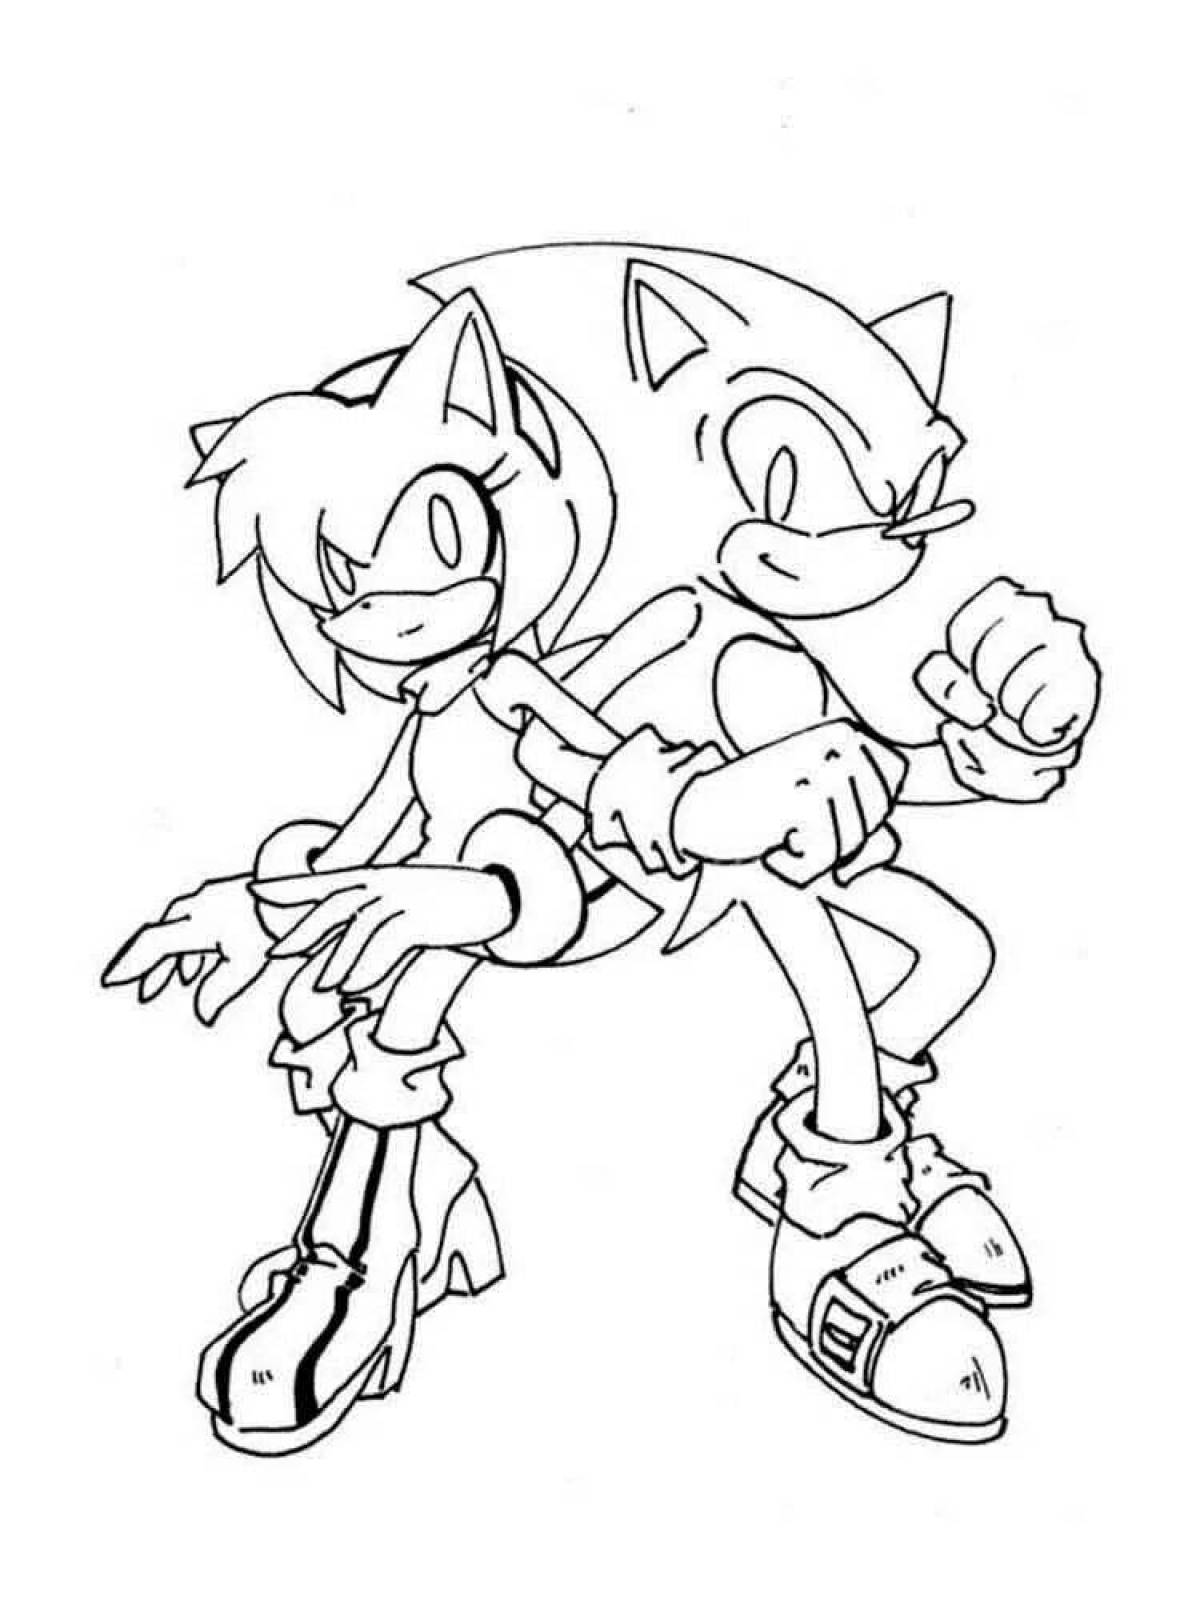 Sonic and amy rose blooming coloring book